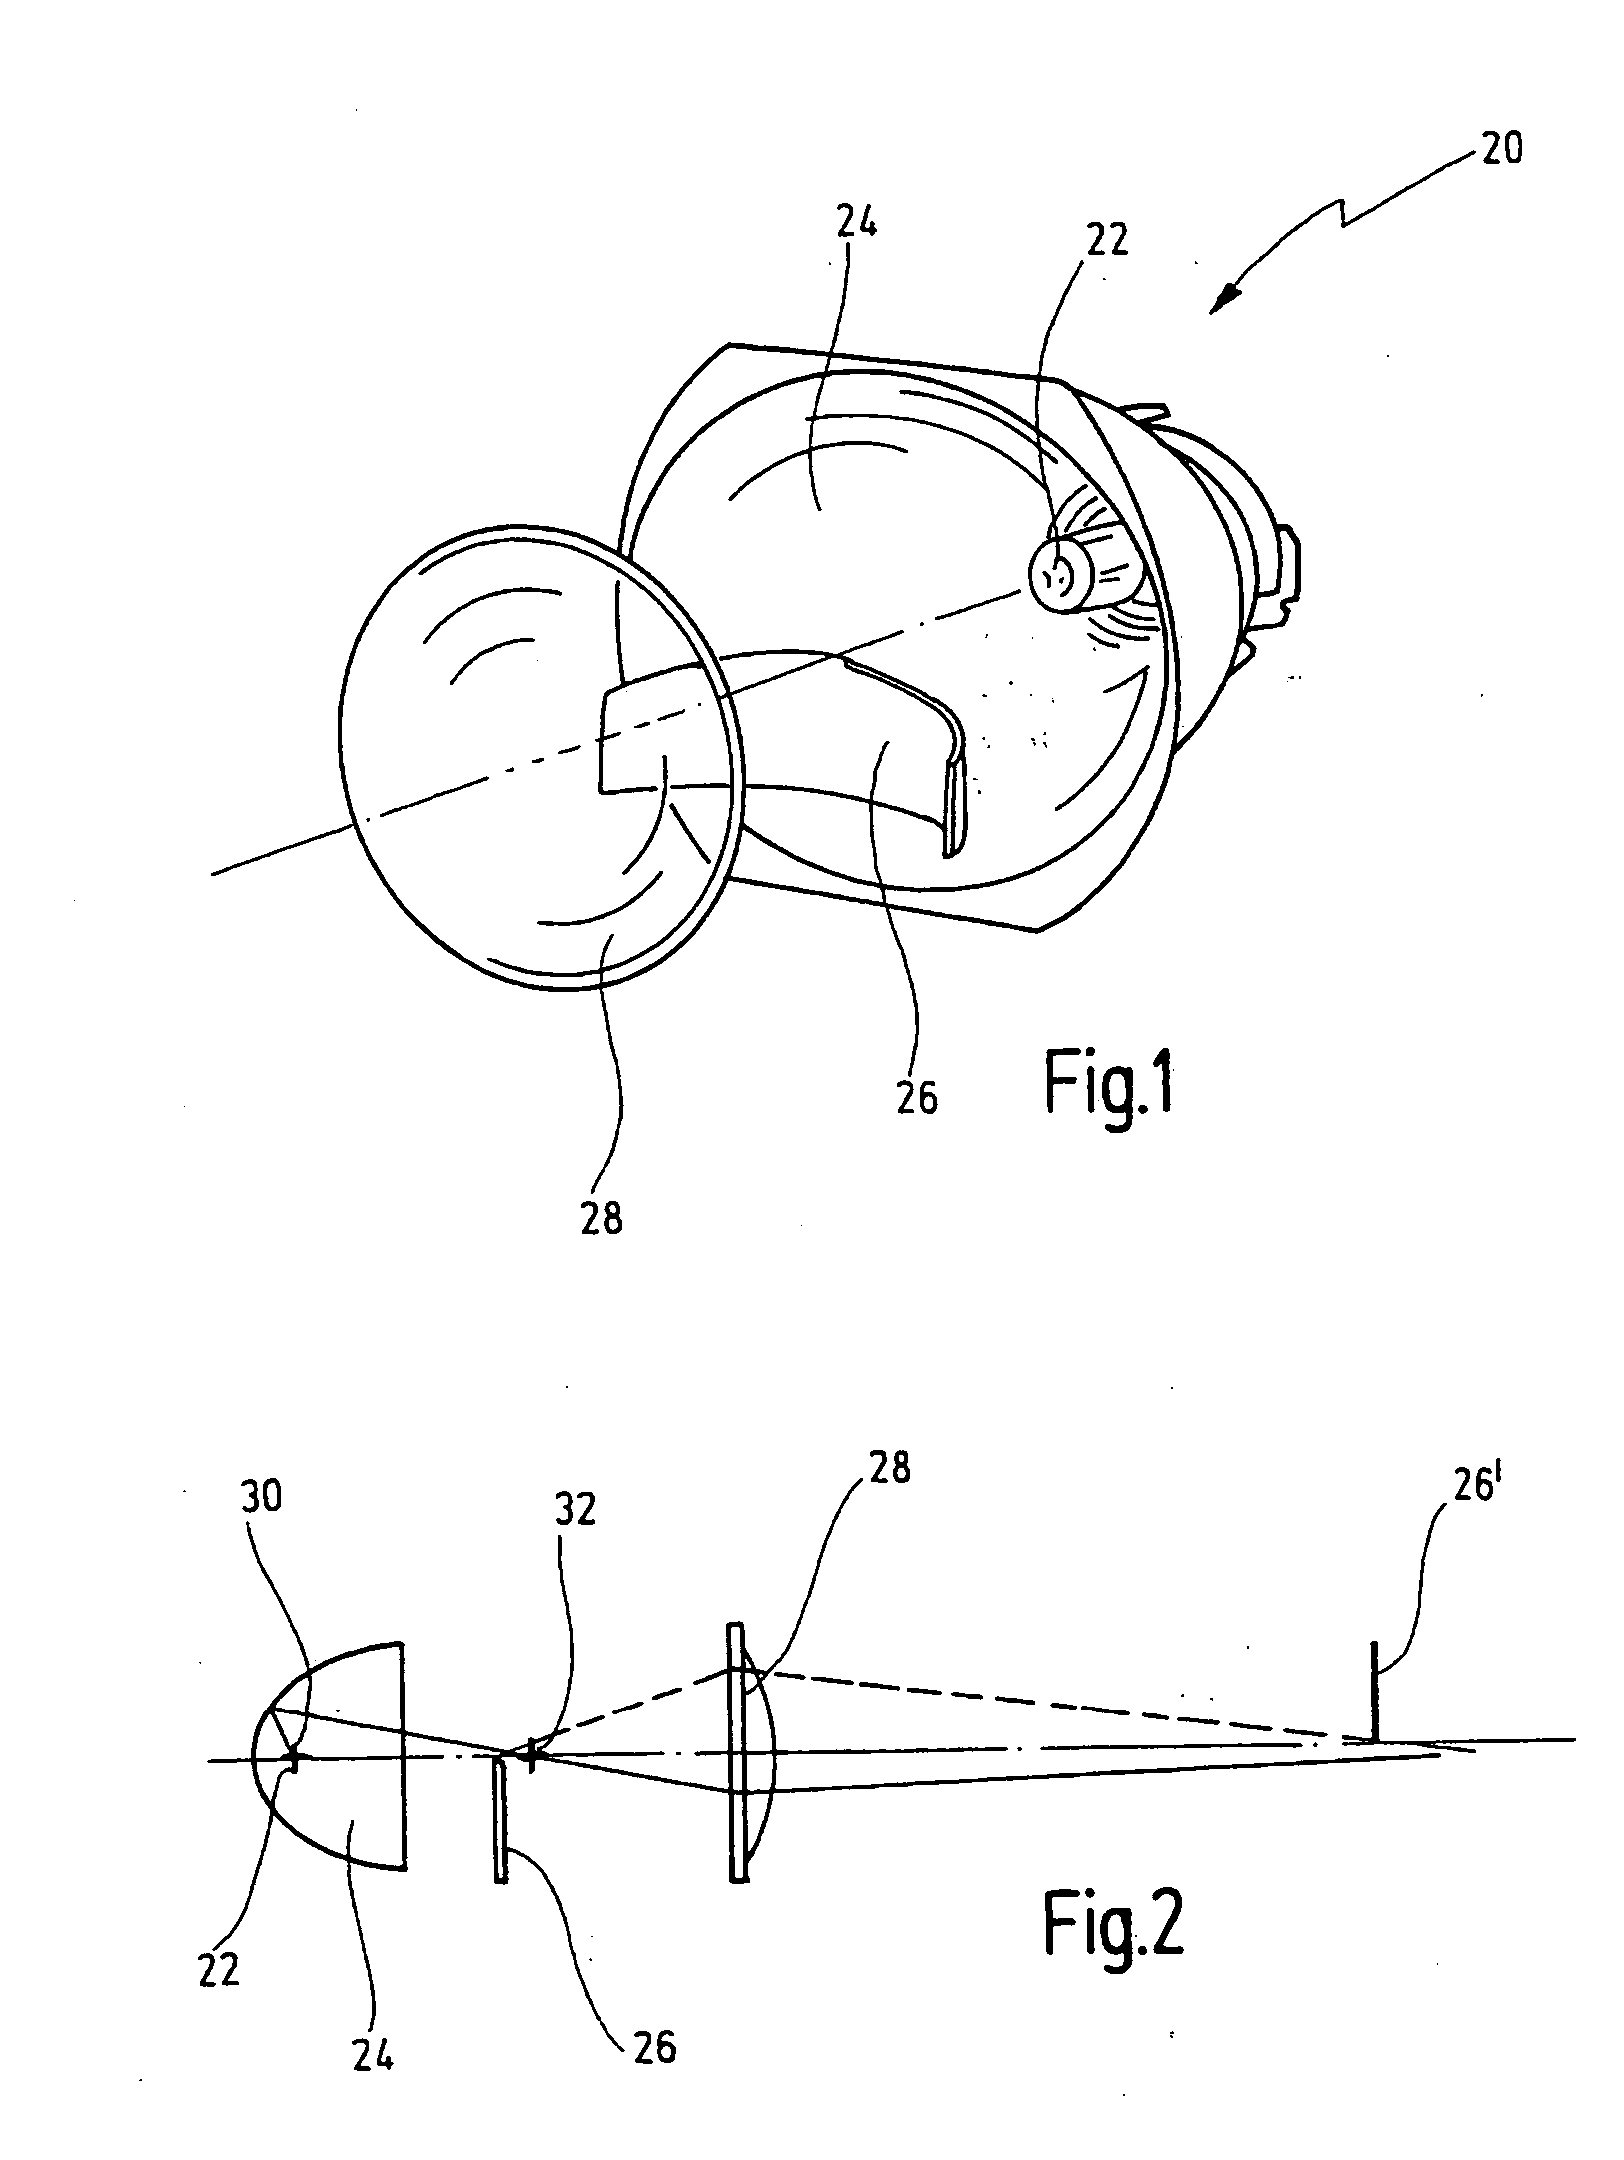 Lighting device with lens, and manufacturing process for making the same